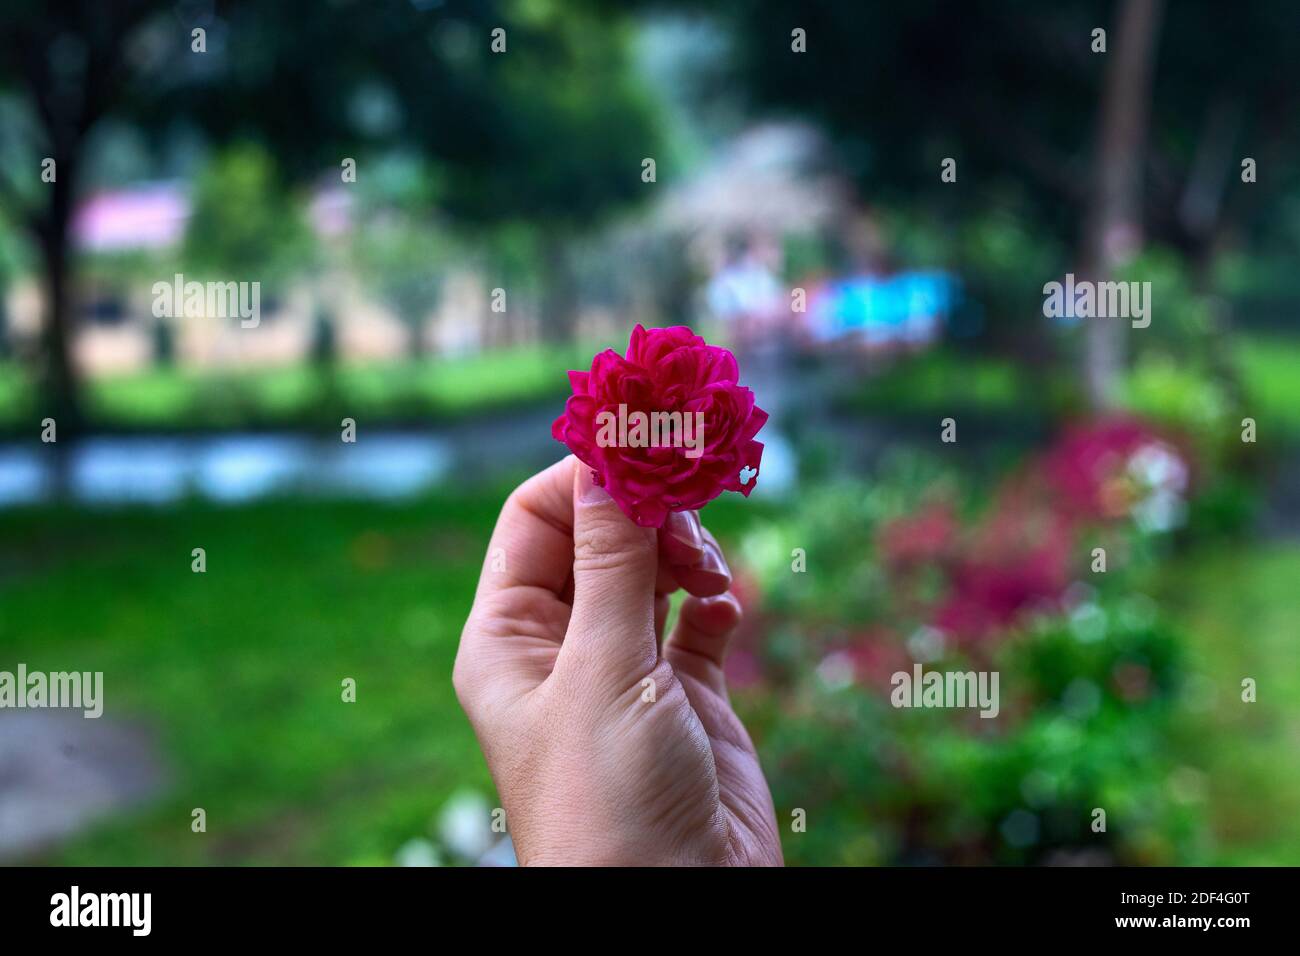 Small red flower in woman hand with summer landscape background. Red rose in hand. Tropical gardening concept photo. Summer garden with blooming flowe Stock Photo